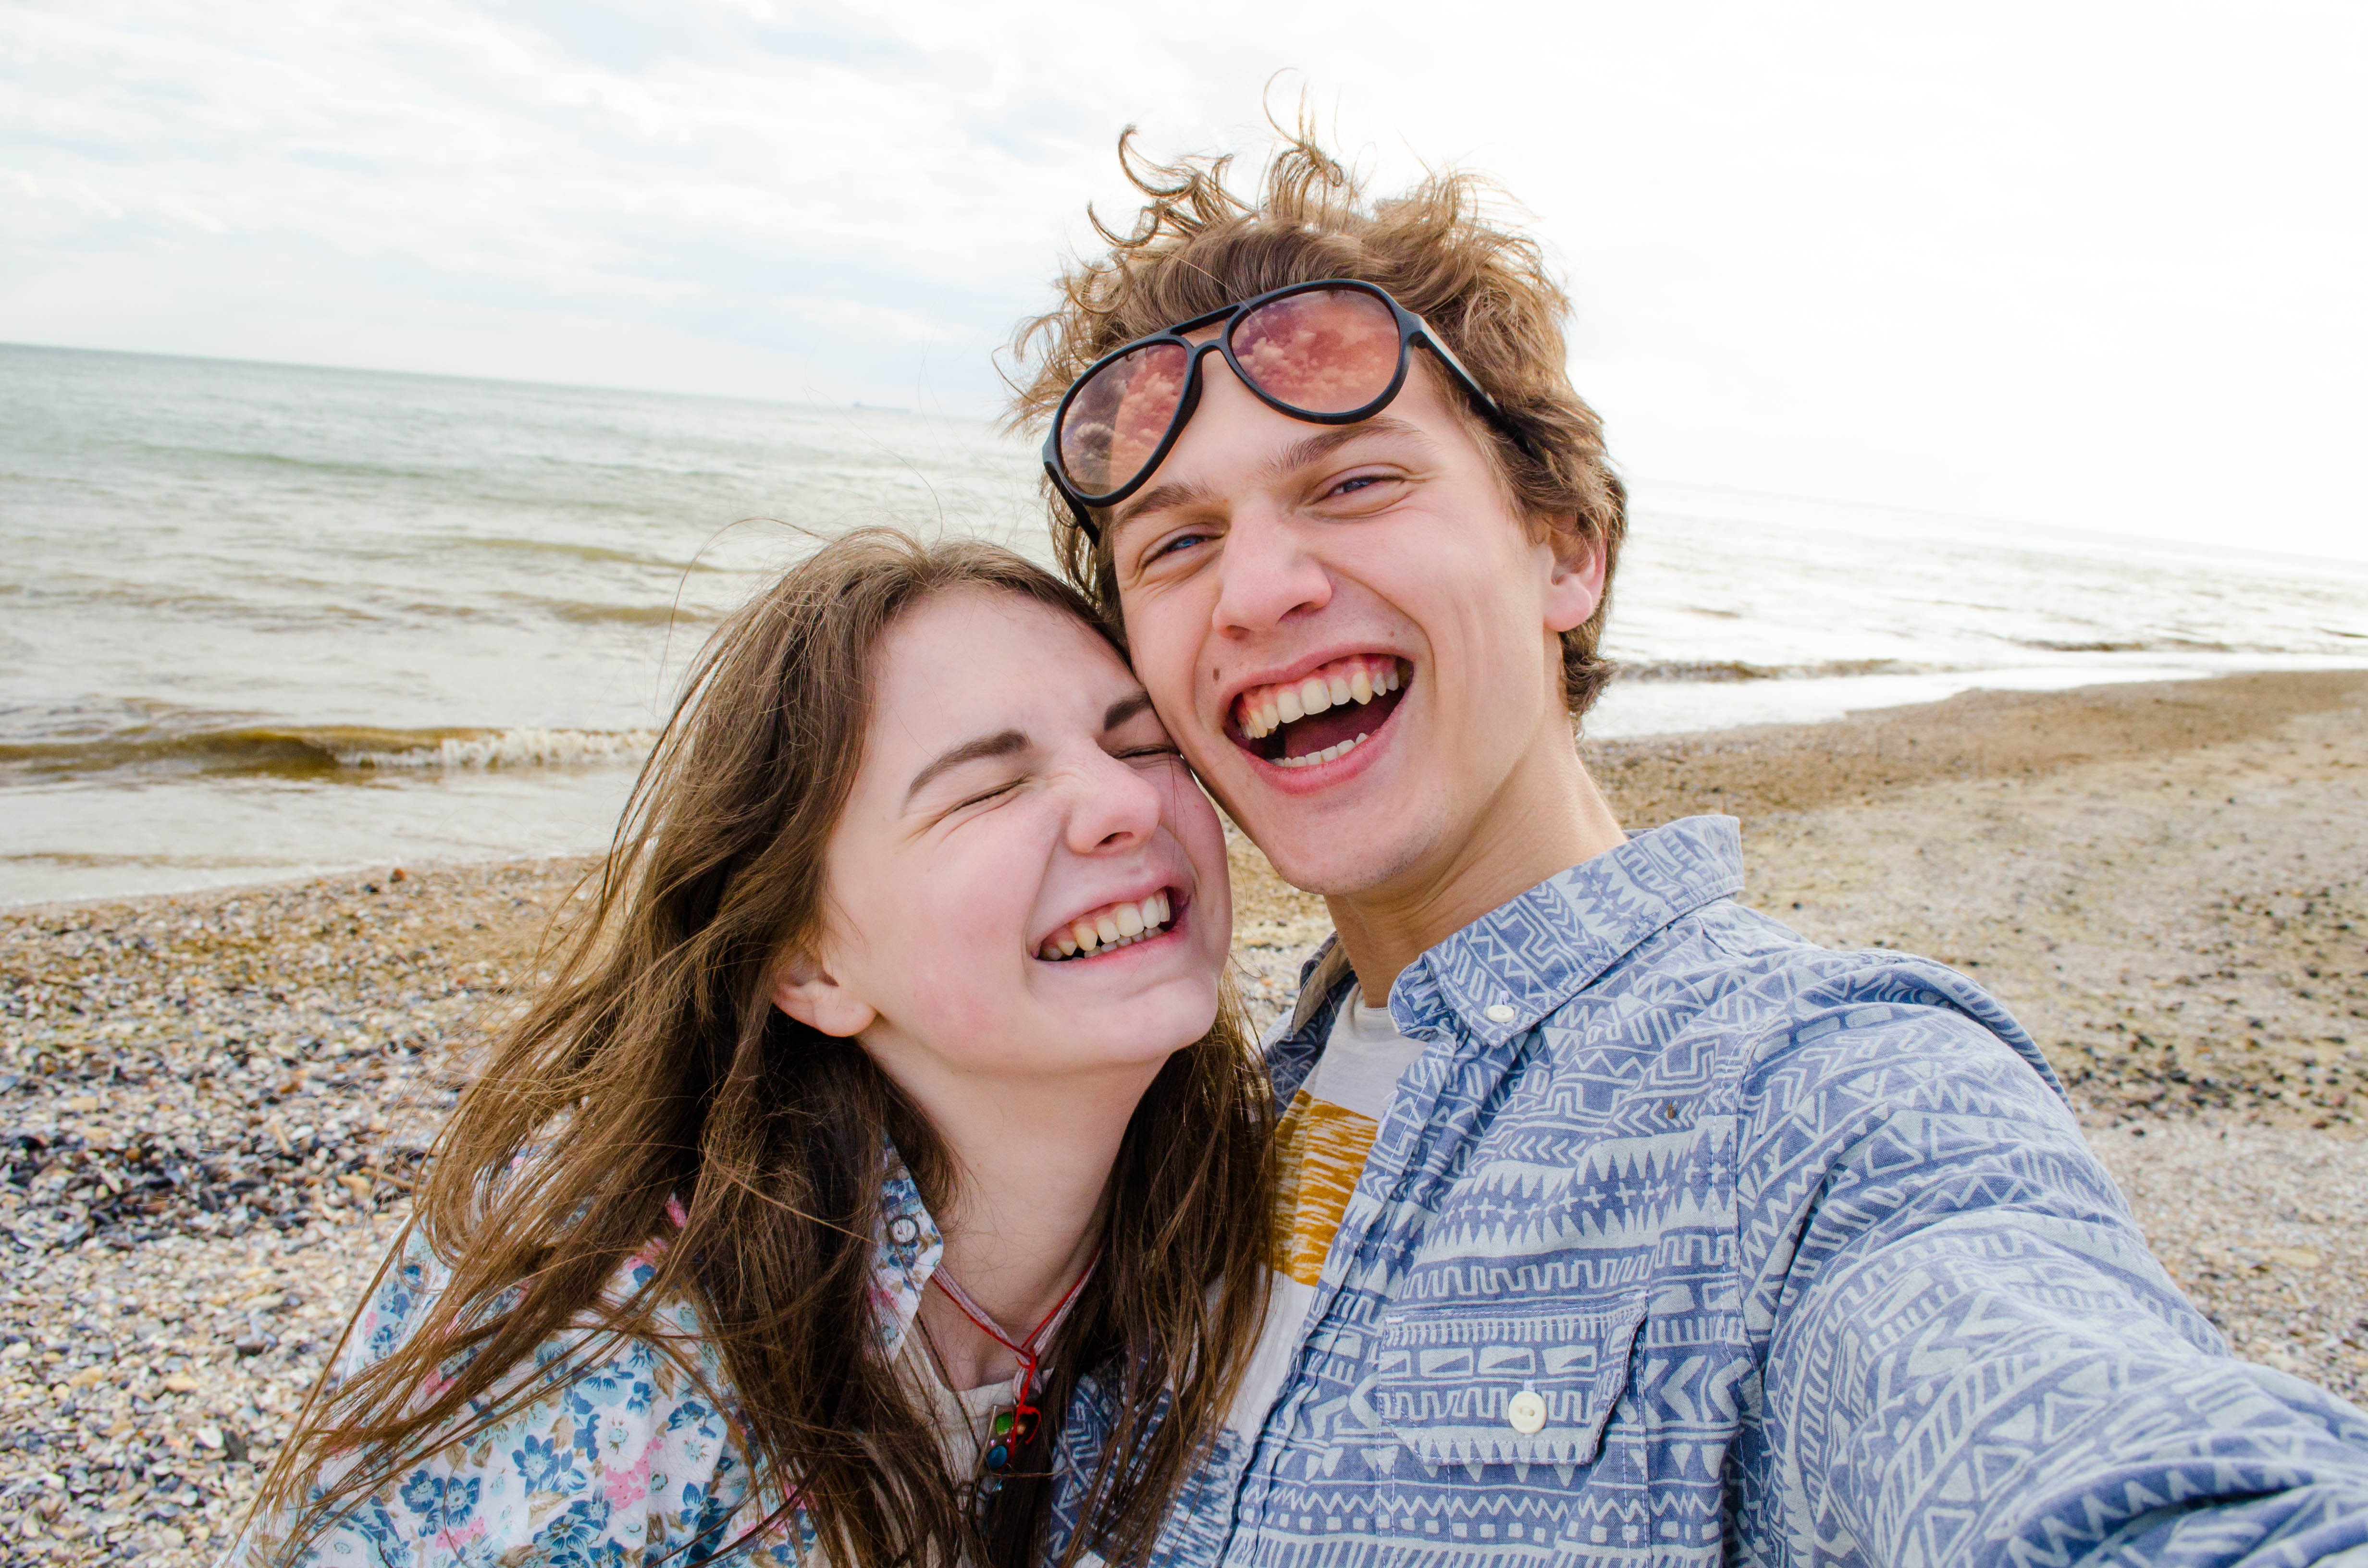 A young couple having fun on the beach | Source: Shutterstock